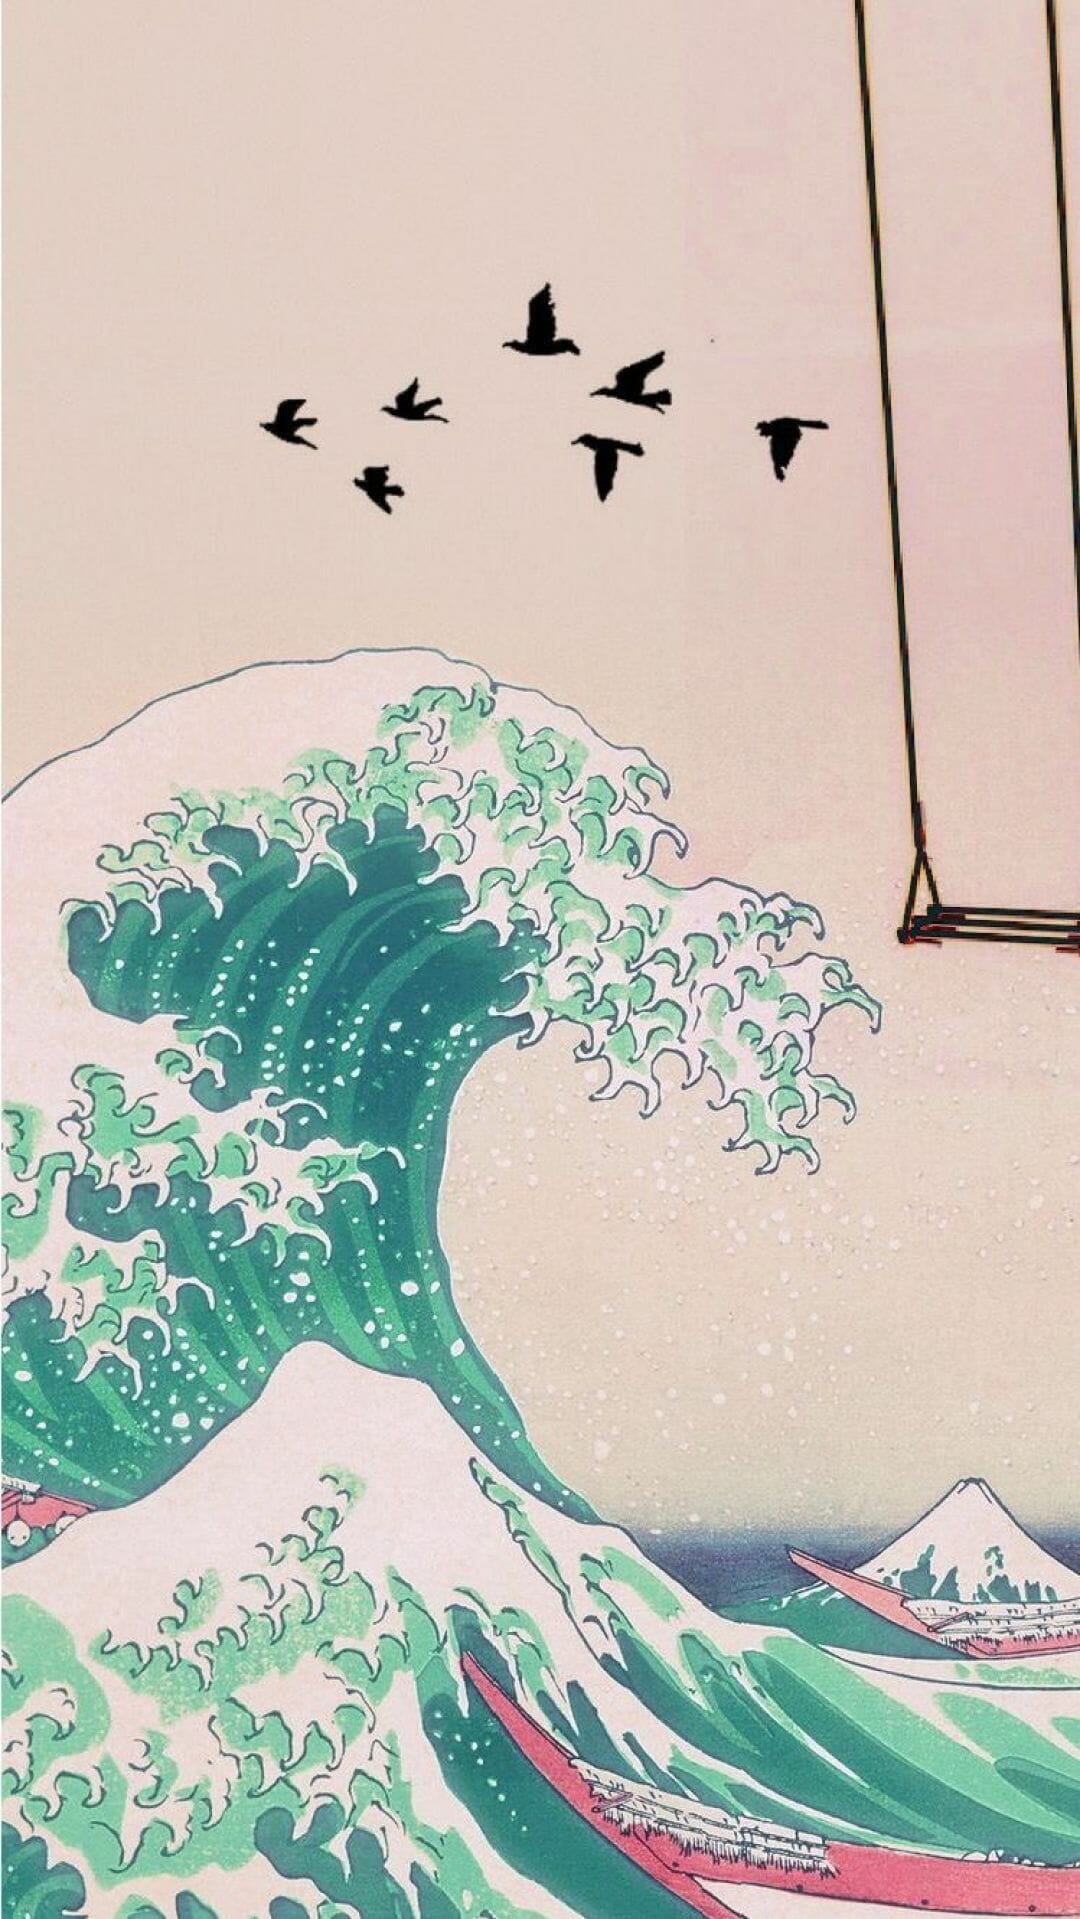 Aesthetic phone wallpaper of a painting of a wave with birds flying above - Retro, vintage